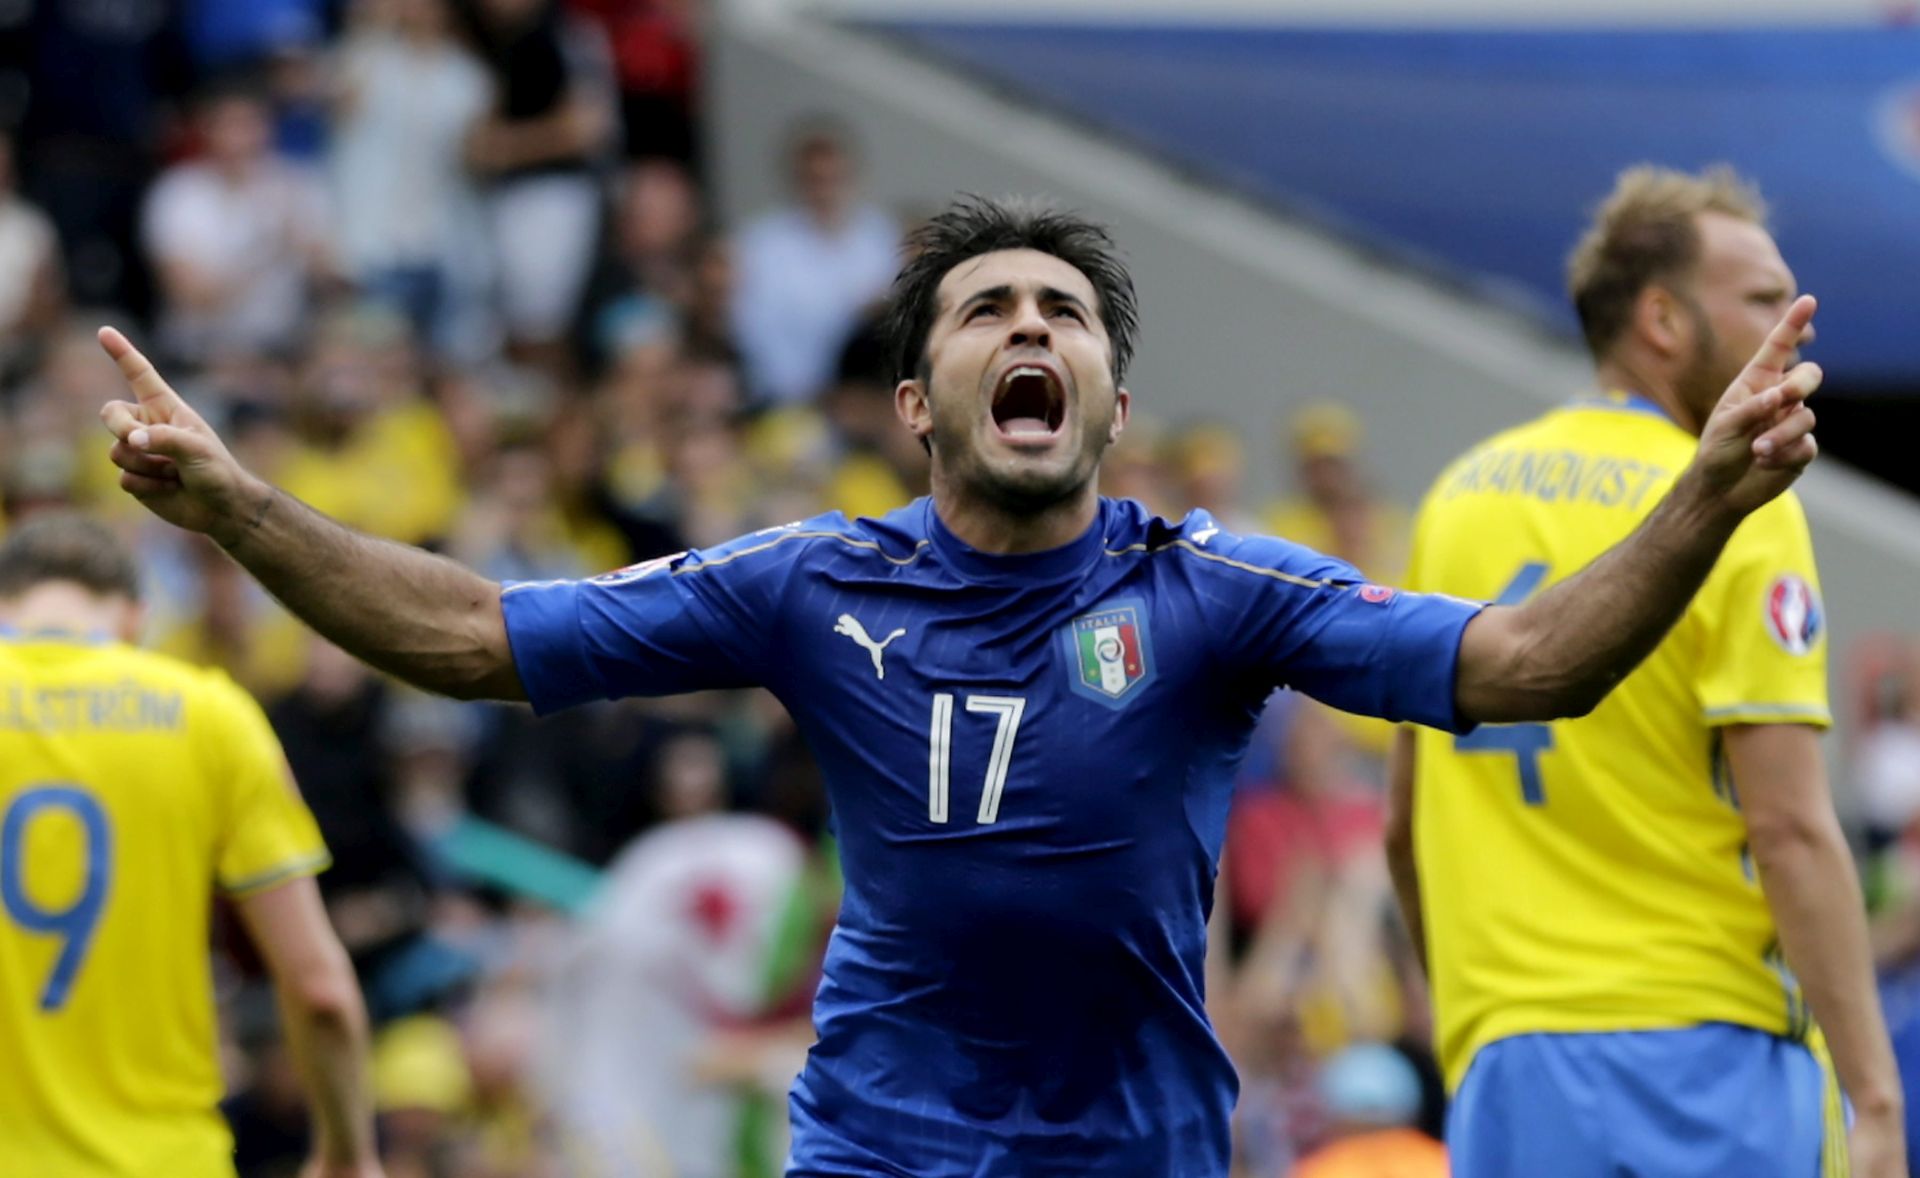 epa05372523 Eder of Italy celebrates scoring the 1-0  during the UEFA EURO 2016 group E preliminary round match between Italy and Sweden at Stade Municipal in Toulouse, France, 17 June 2016.

(RESTRICTIONS APPLY: For editorial news reporting purposes only. Not used for commercial or marketing purposes without prior written approval of UEFA. Images must appear as still images and must not emulate match action video footage. Photographs published in online publications (whether via the Internet or otherwise) shall have an interval of at least 20 seconds between the posting.)  EPA/ARMANDO BABANI   EDITORIAL USE ONLY  EPA/ARMANDO BABANI   EDITORIAL USE ONLY